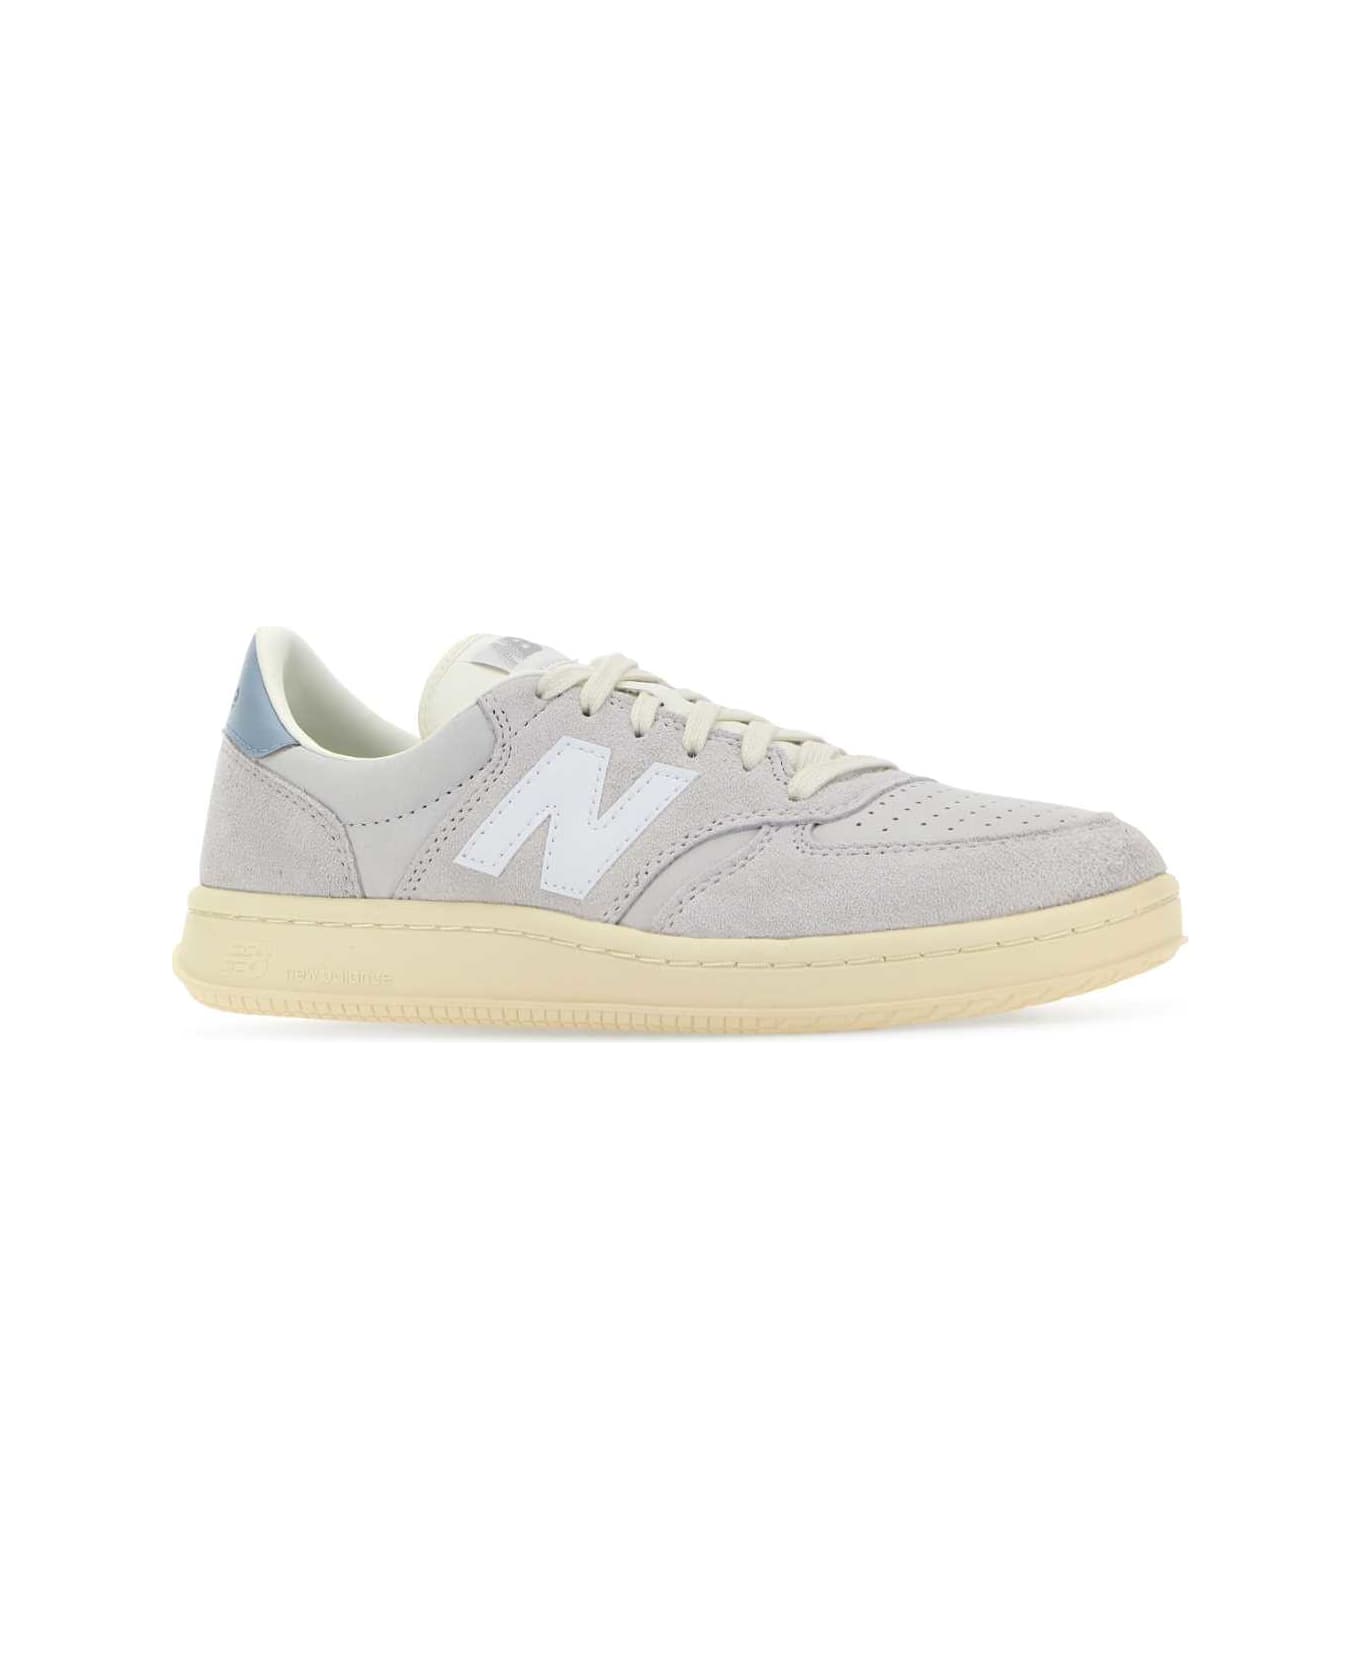 New Balance Light Grey Suede T500 Sneakers - OFFWHITE